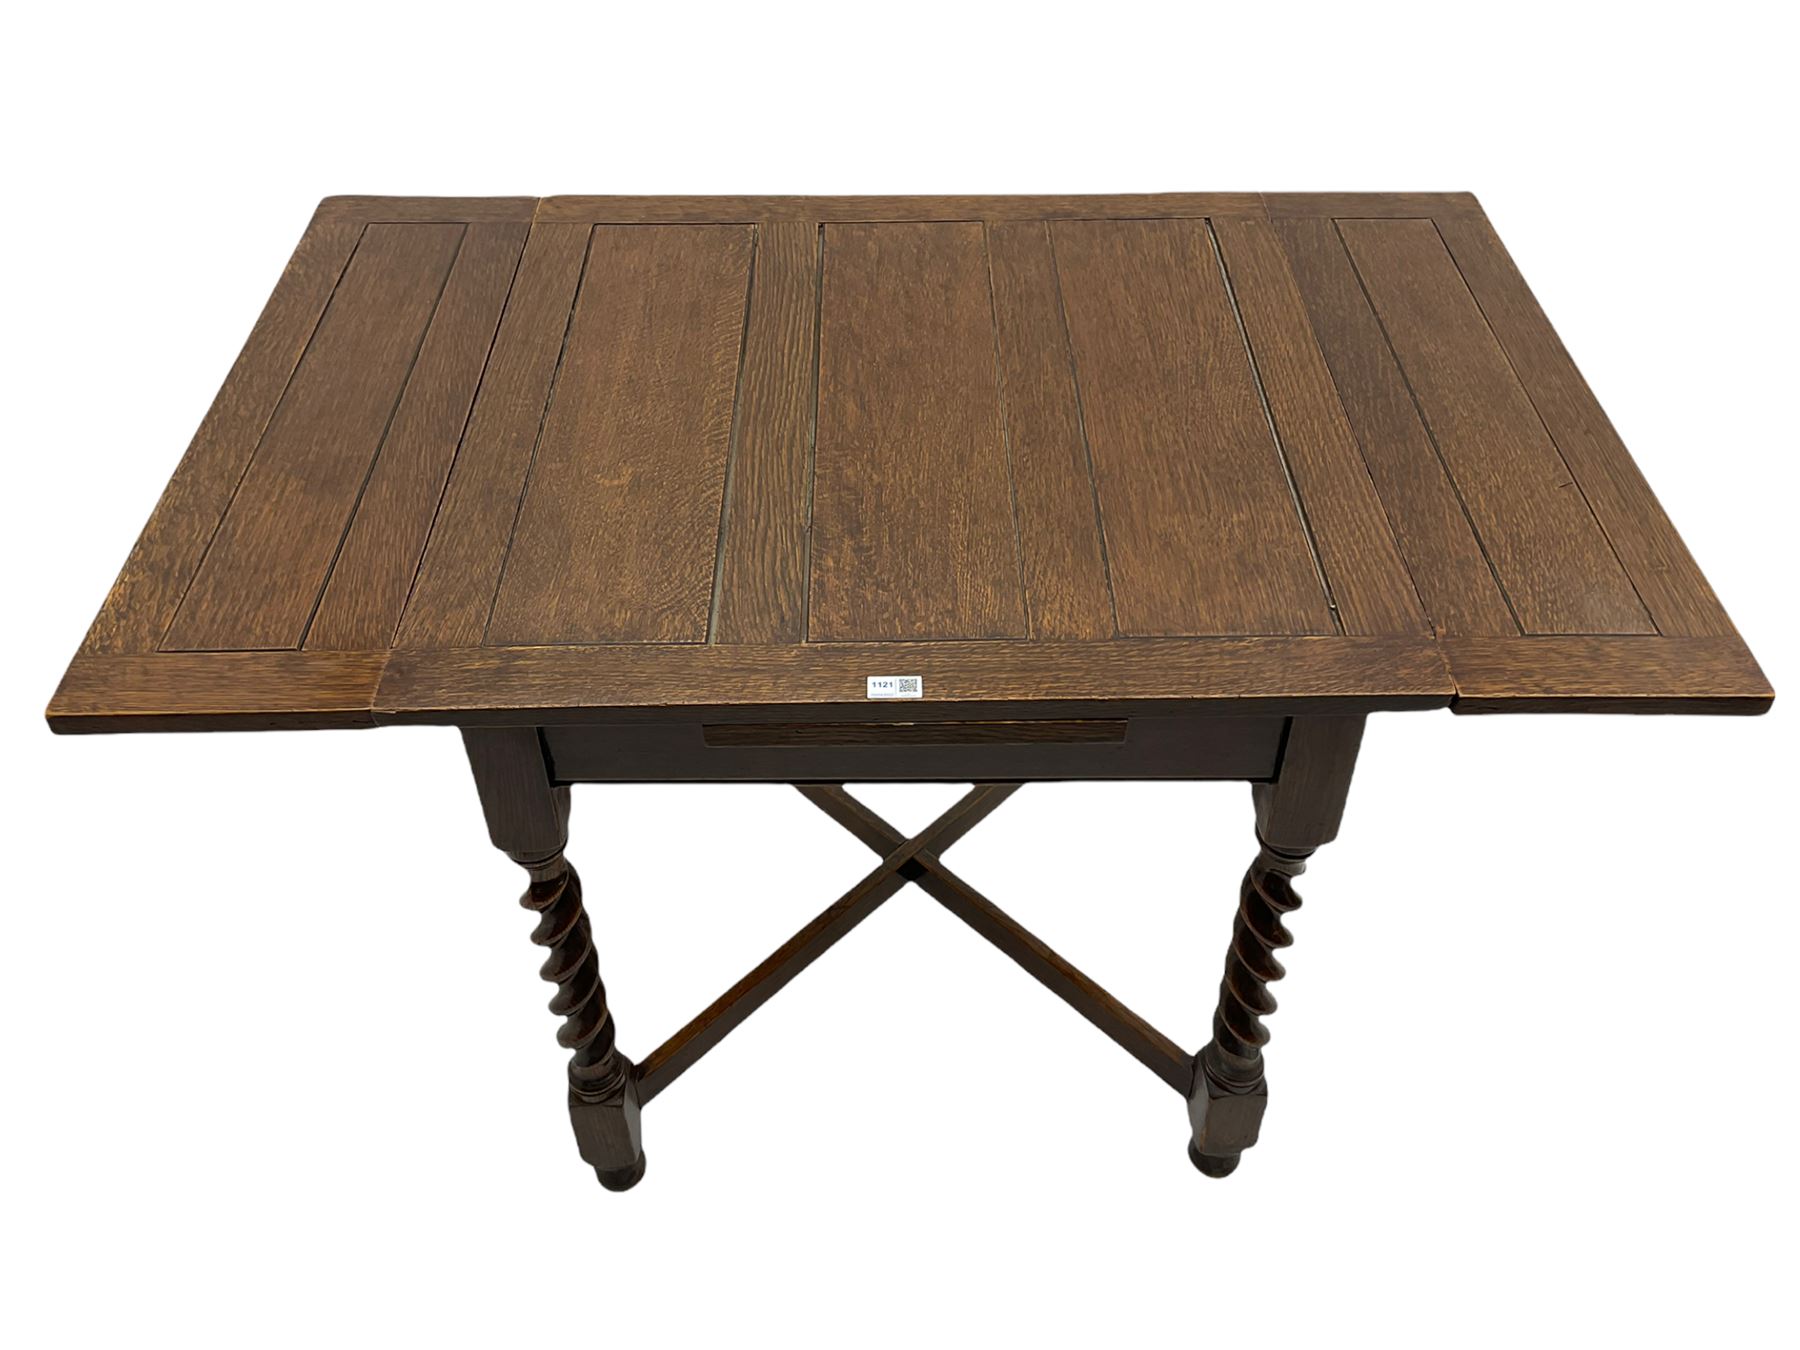 Early 20th century oak barley twist drawer leaf dining table - Image 7 of 10